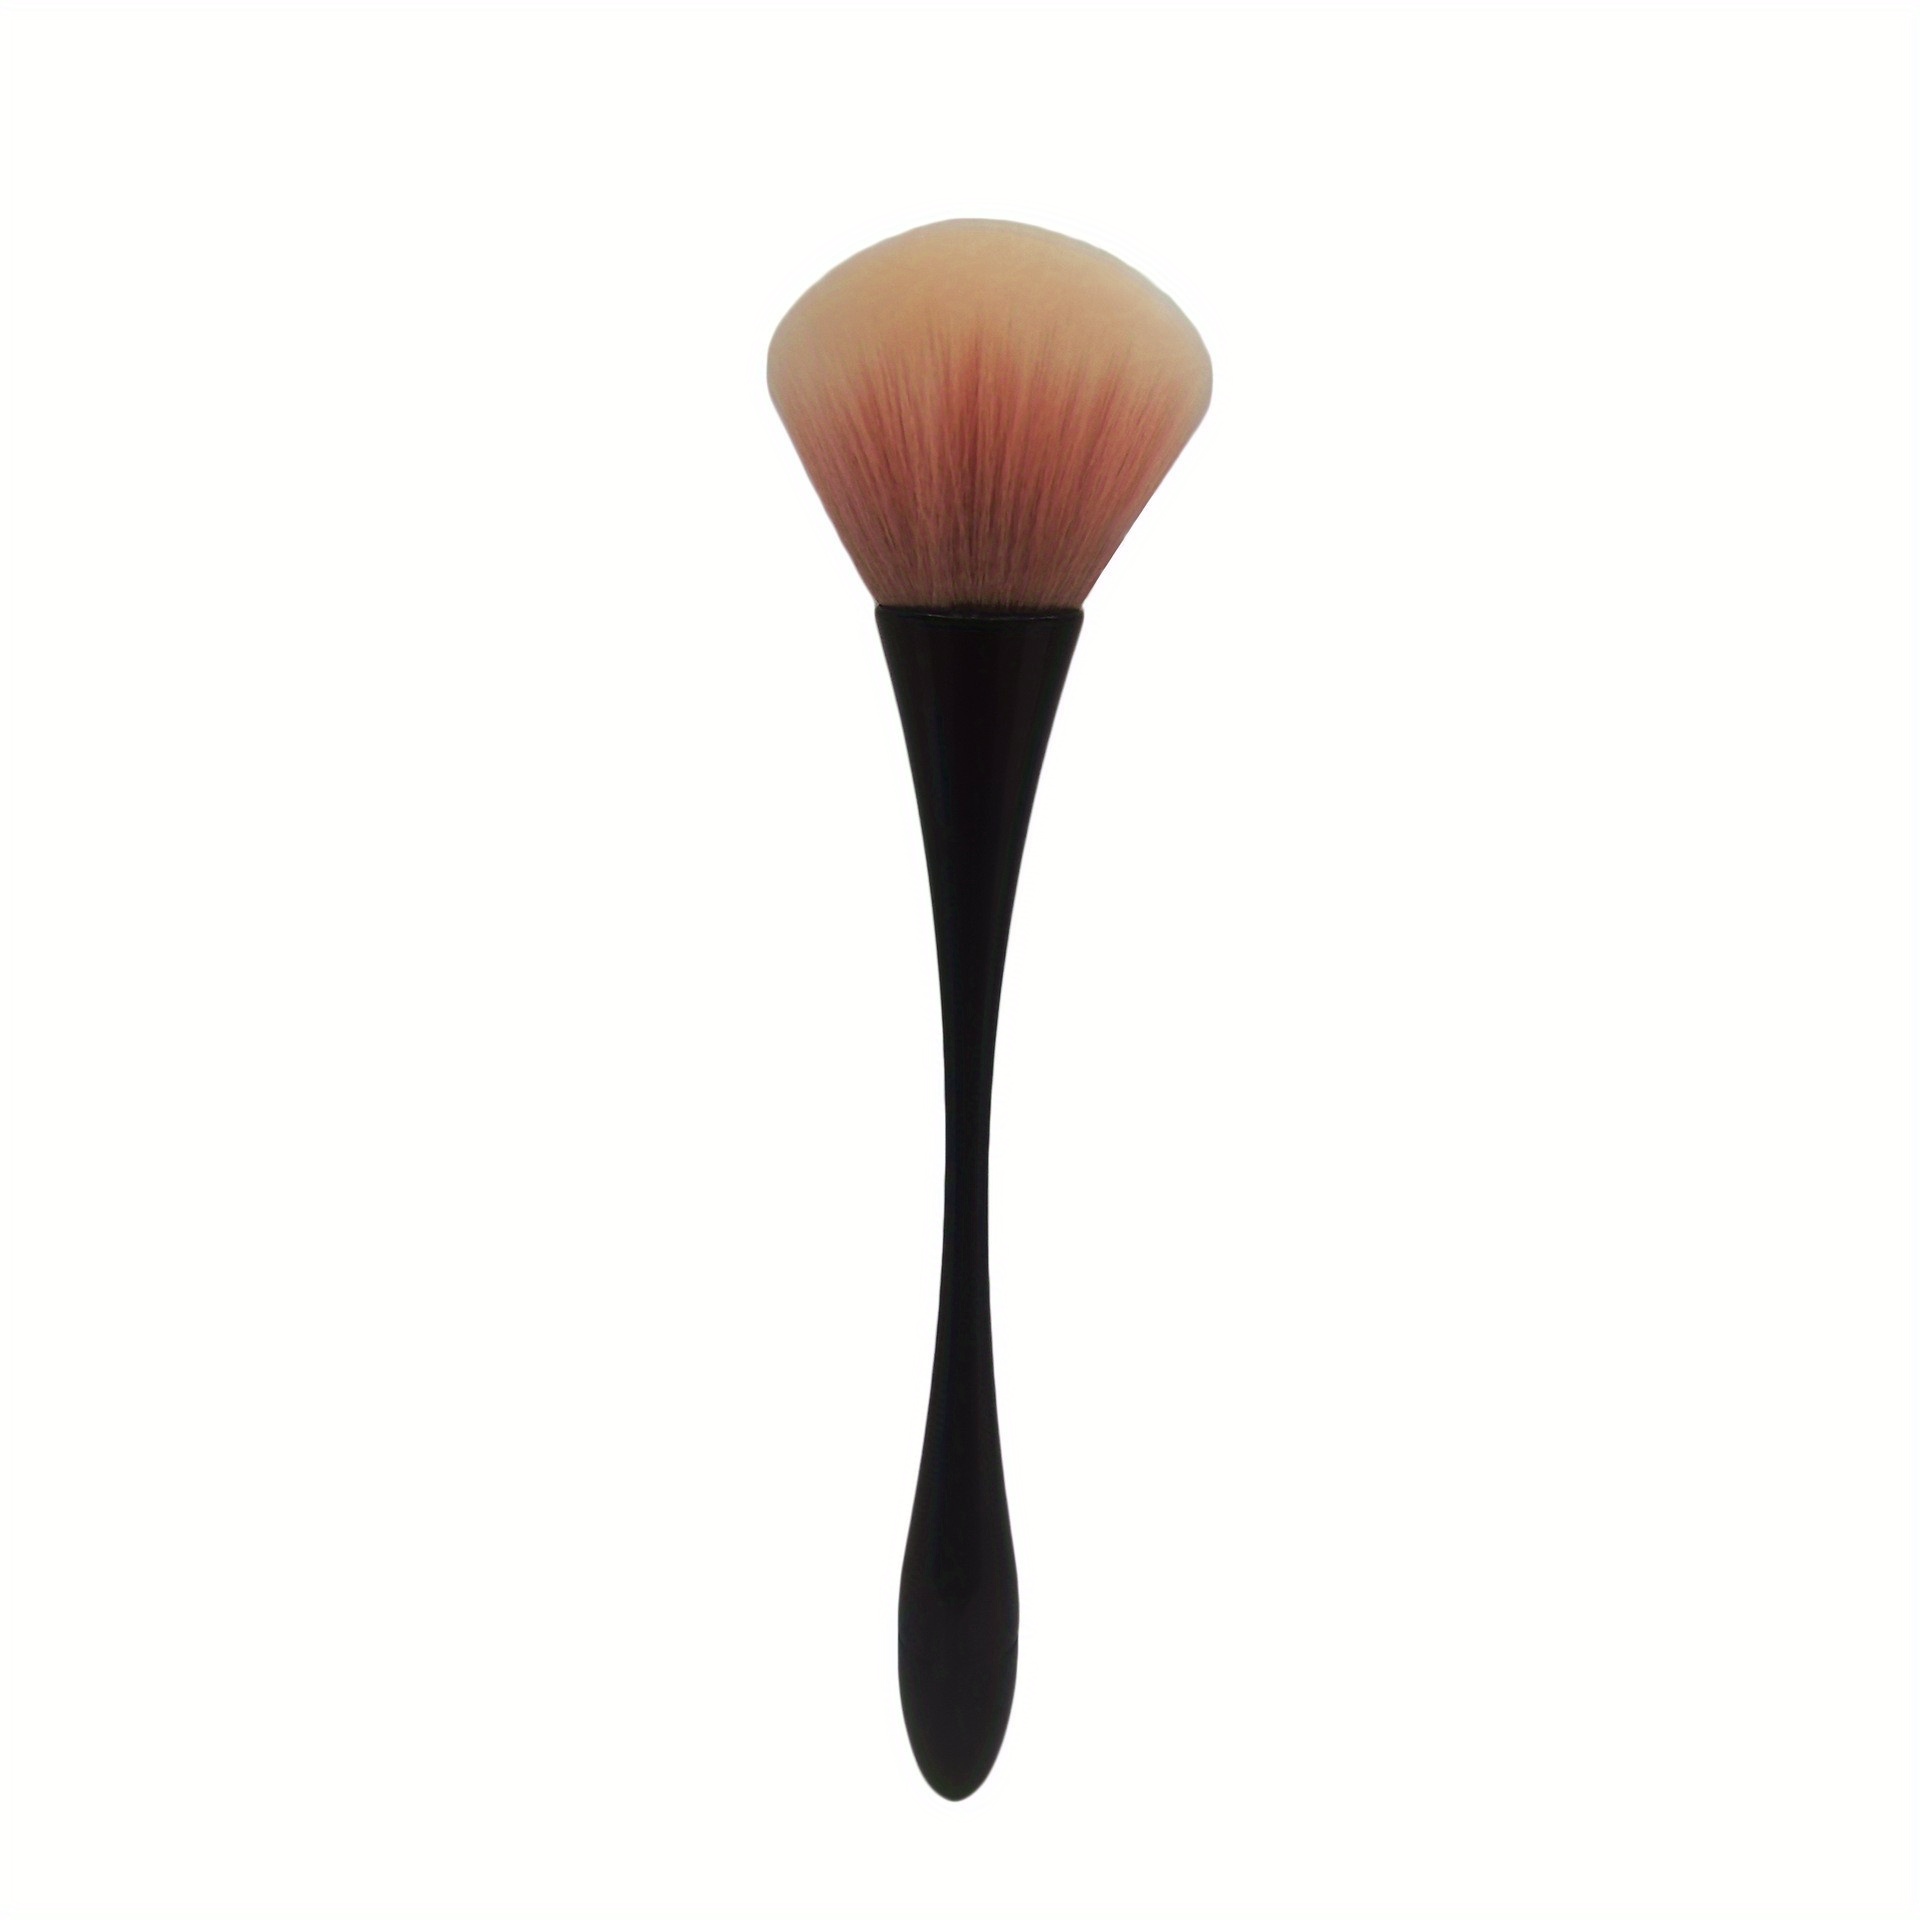 Large Finishing Powder Makeup Brush - Big Fluffy Domed Powder Make Up  Brushes for Full Face, Body Bronzer Contouring, Loose, Mineral, Compact